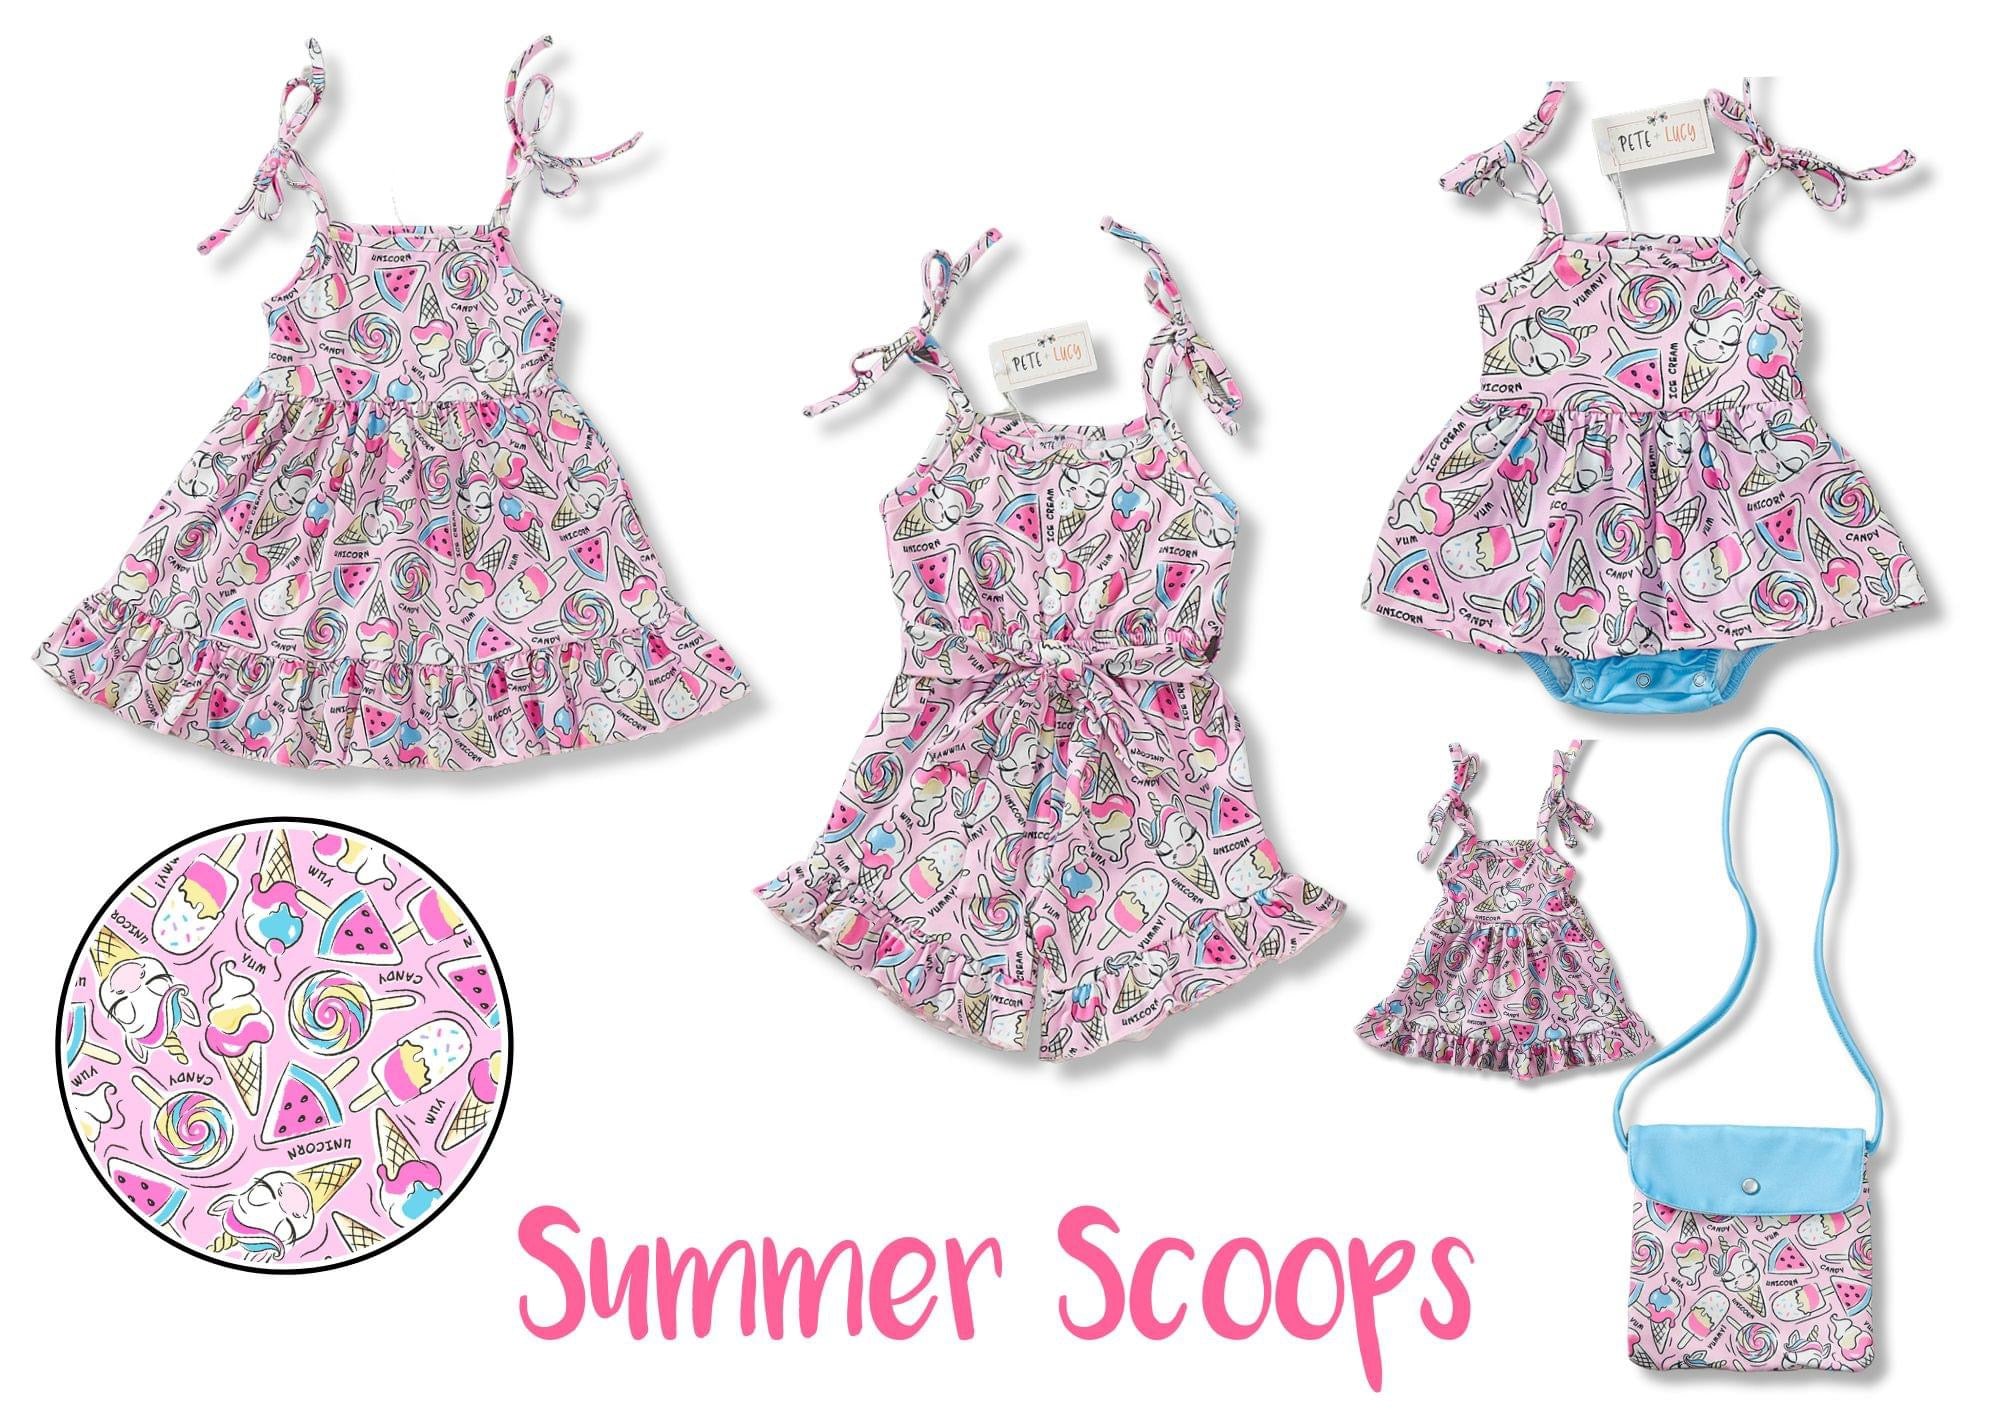 Summer Scoops Dress by Pete and Lucy